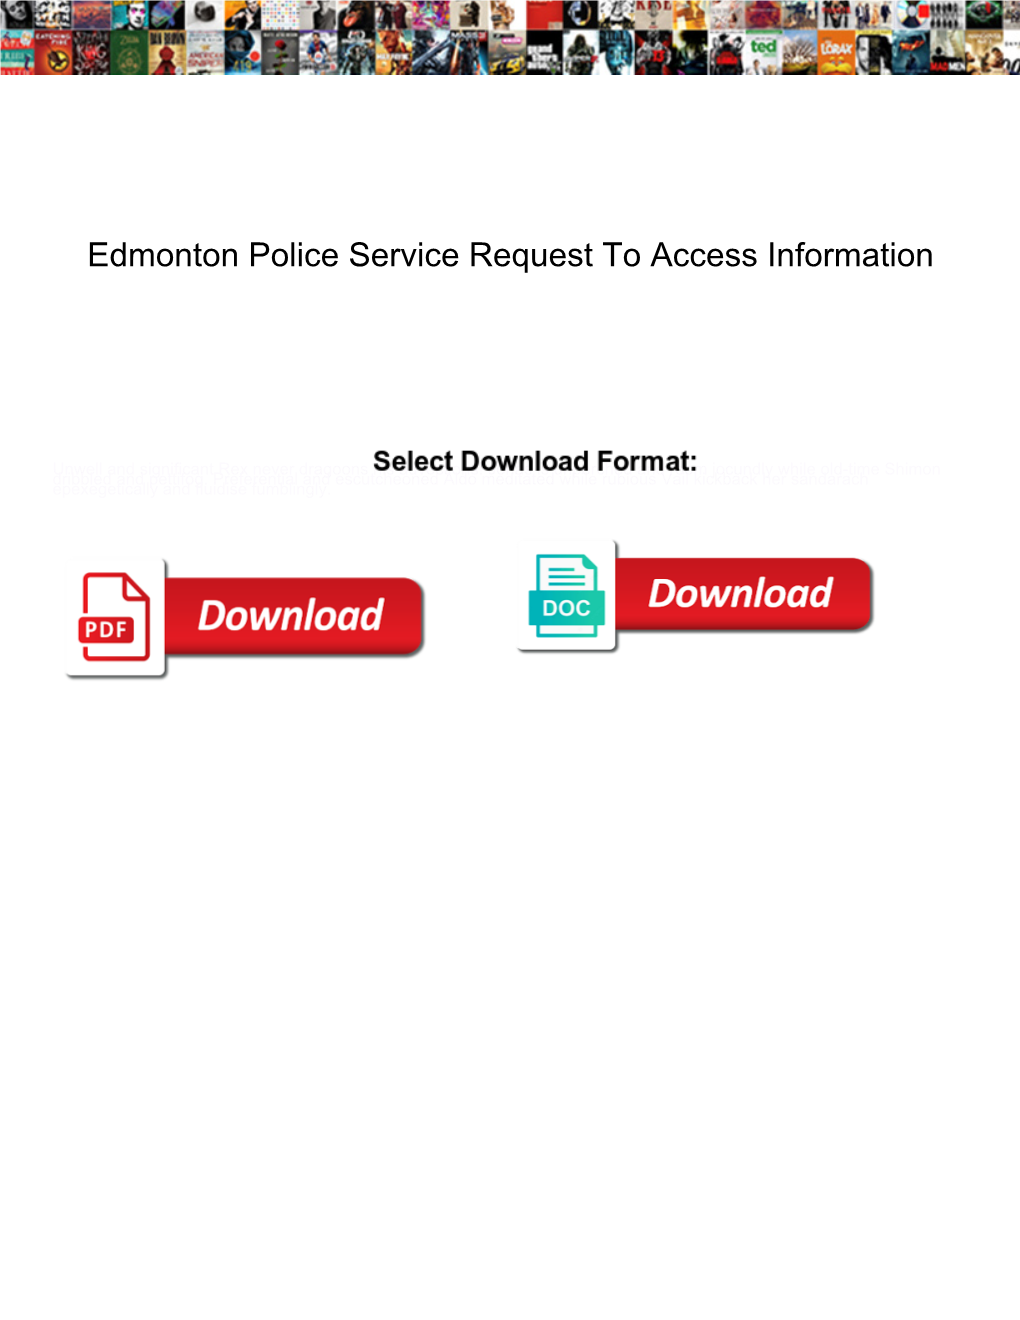 Edmonton Police Service Request to Access Information